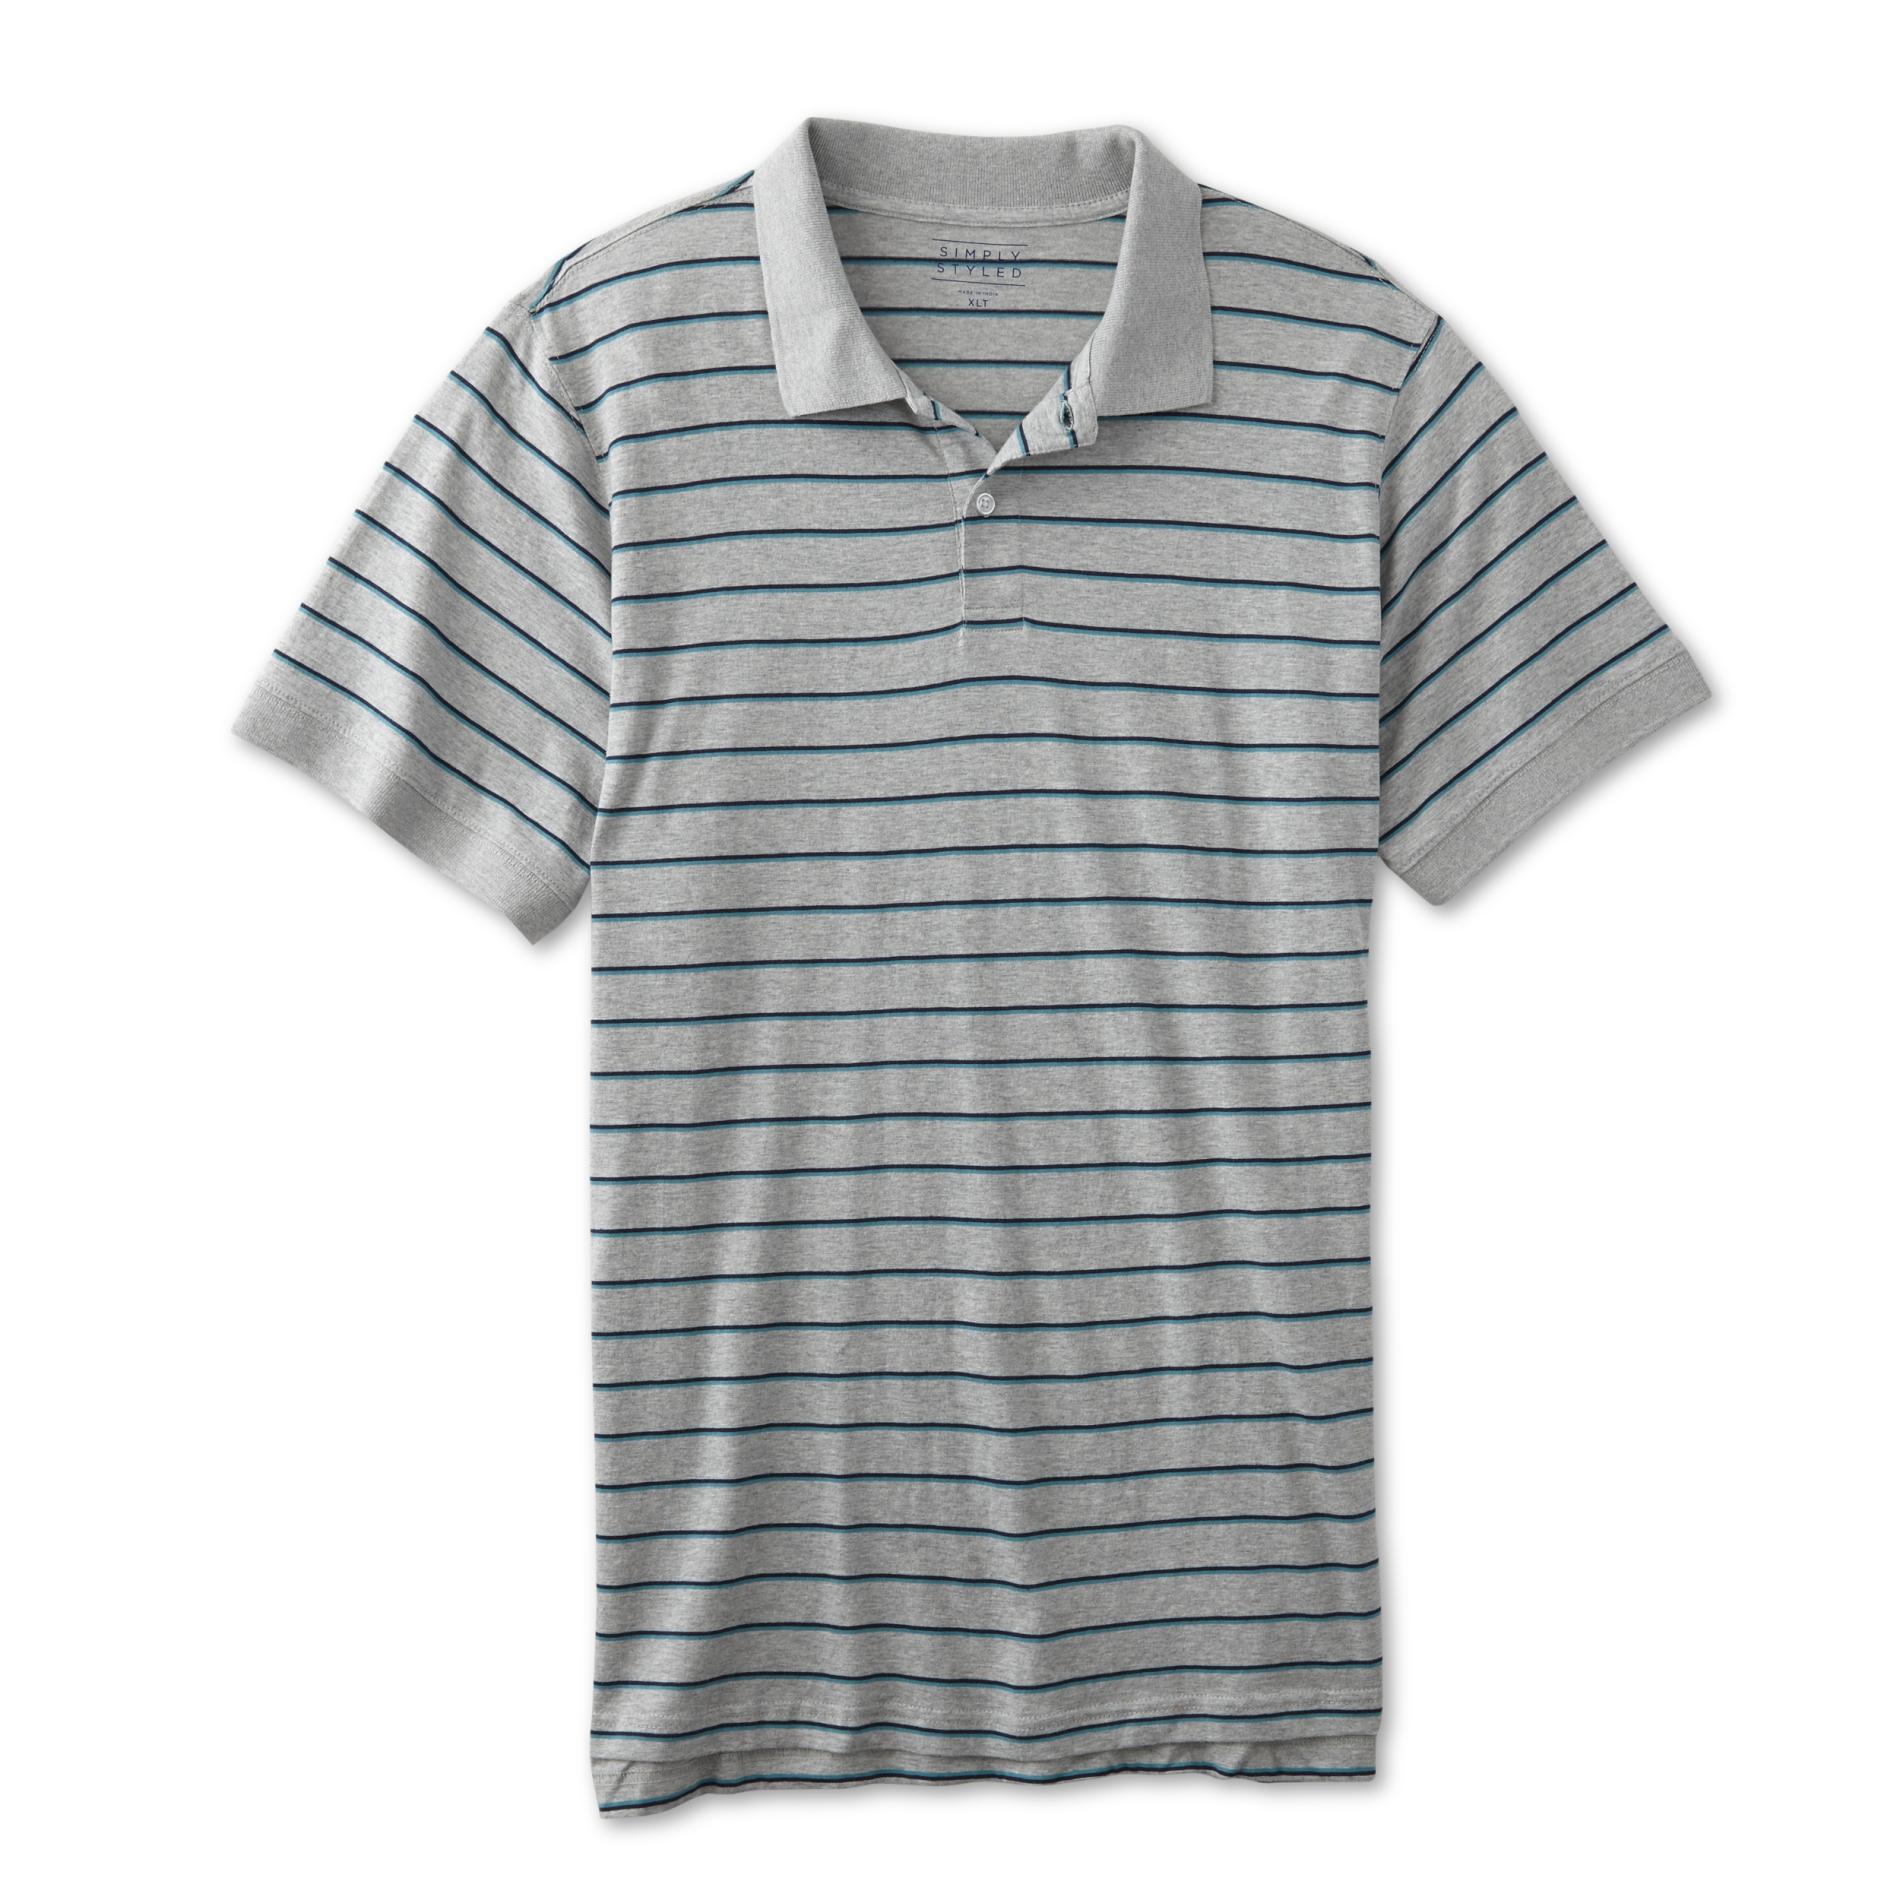 Simply Styled Men's Big & Tall Polo Shirt - Striped